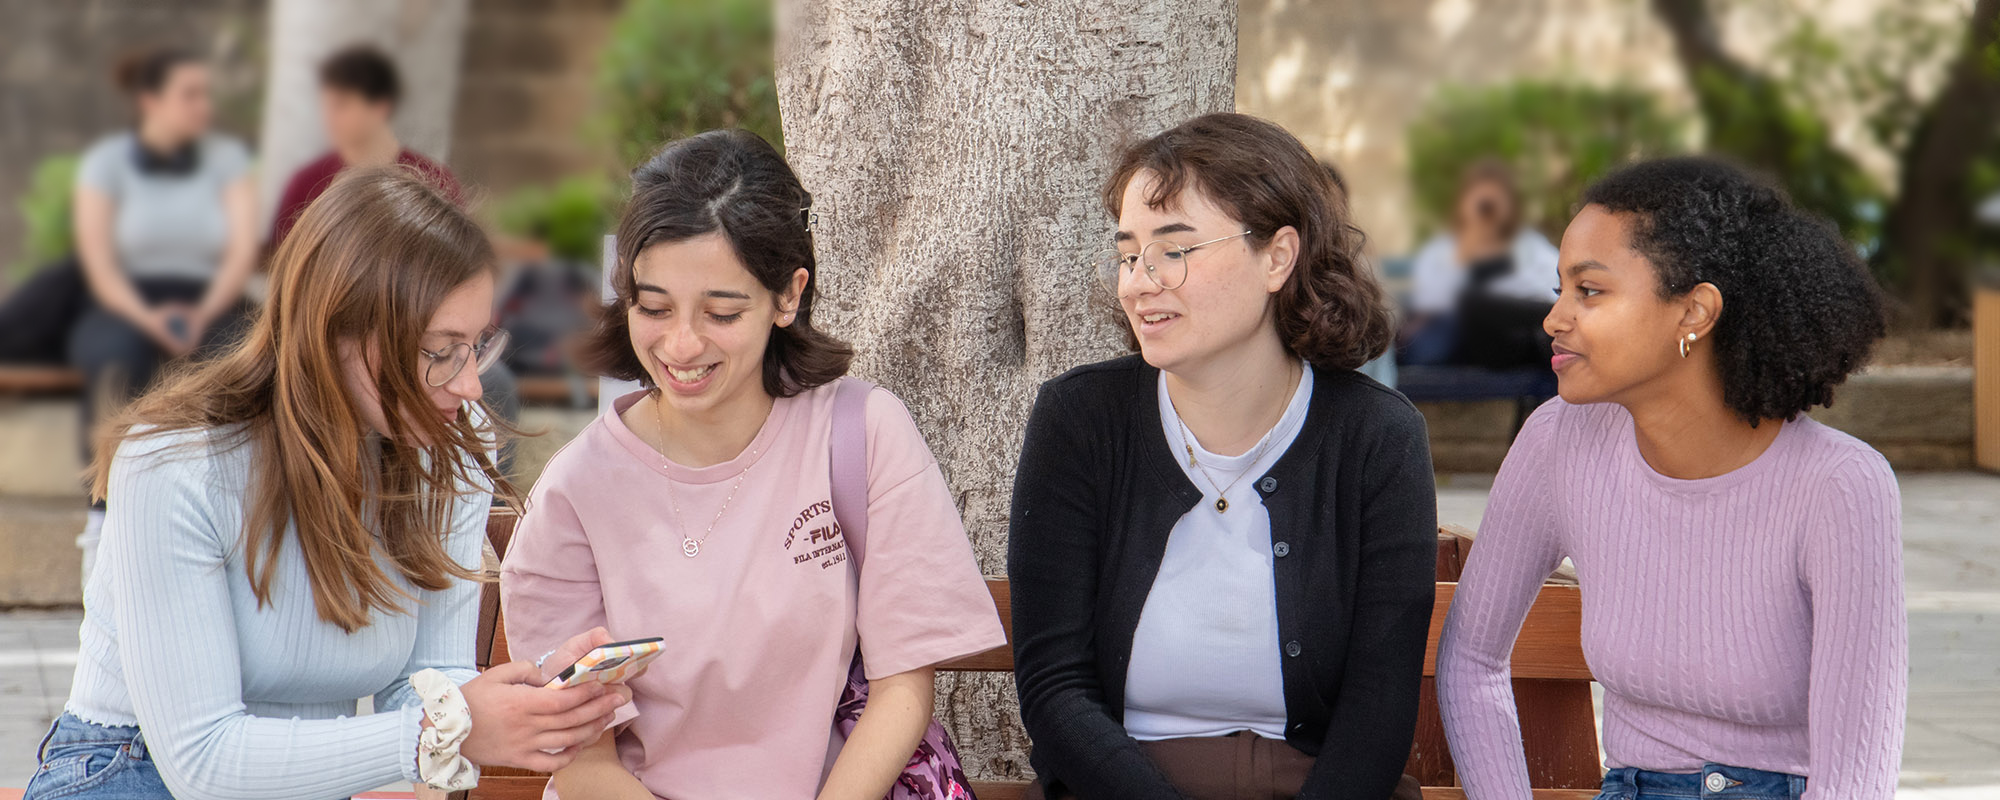 Four girls sitting in an outdoor space with a tree behind them; one of the girls has a smartphone in her hand